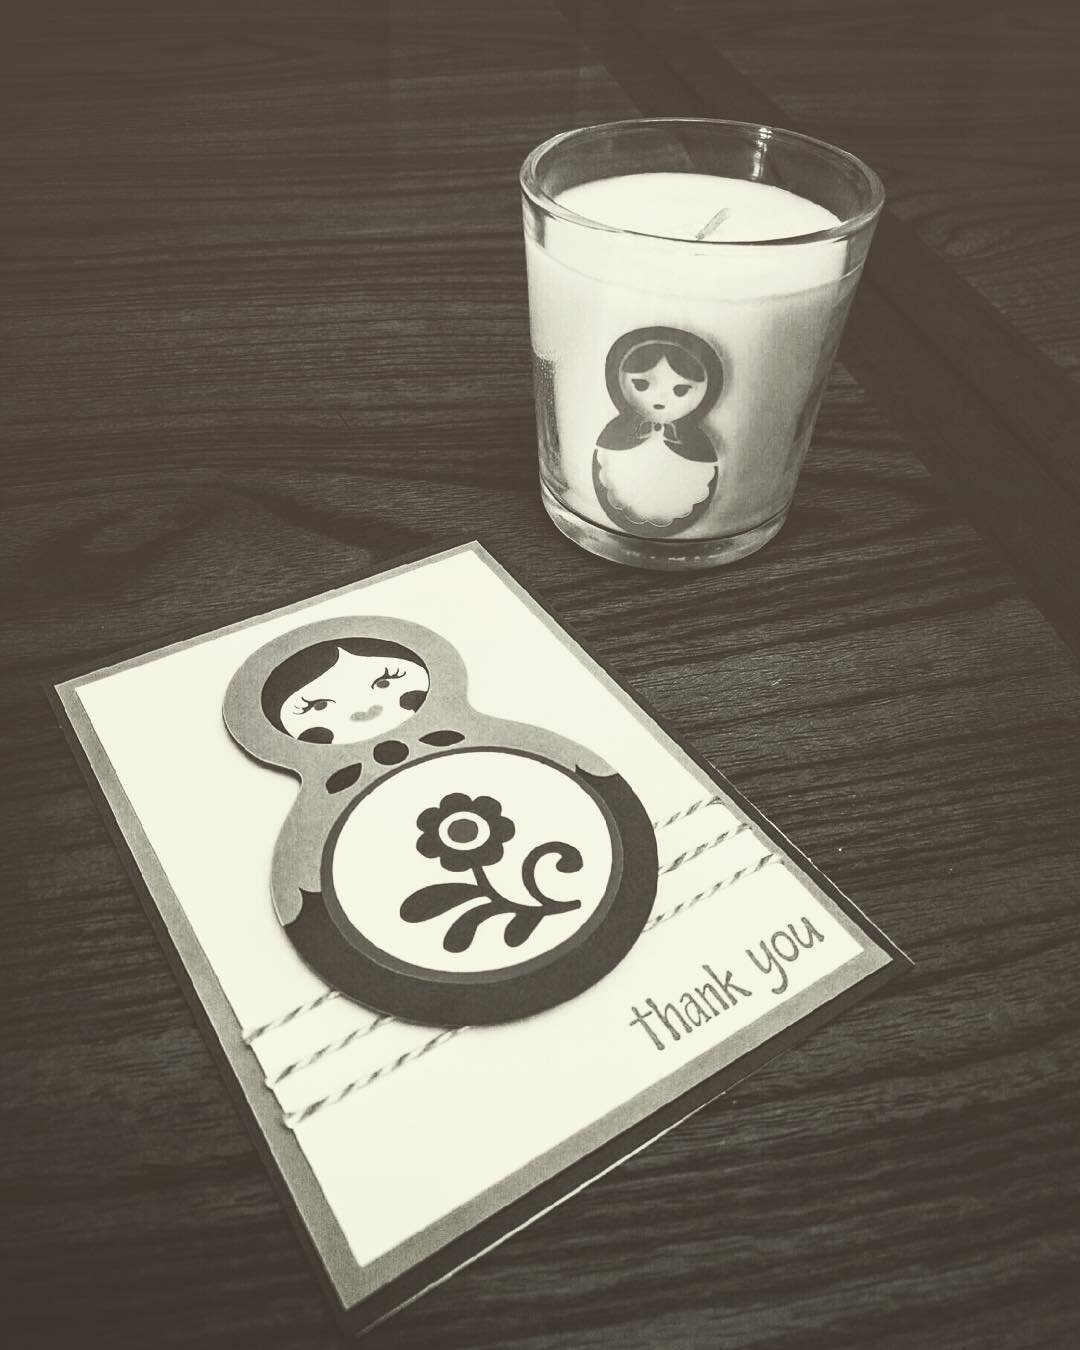 Candle and thank you card collaboration with @tinykis. #candle #russiandoll #collection